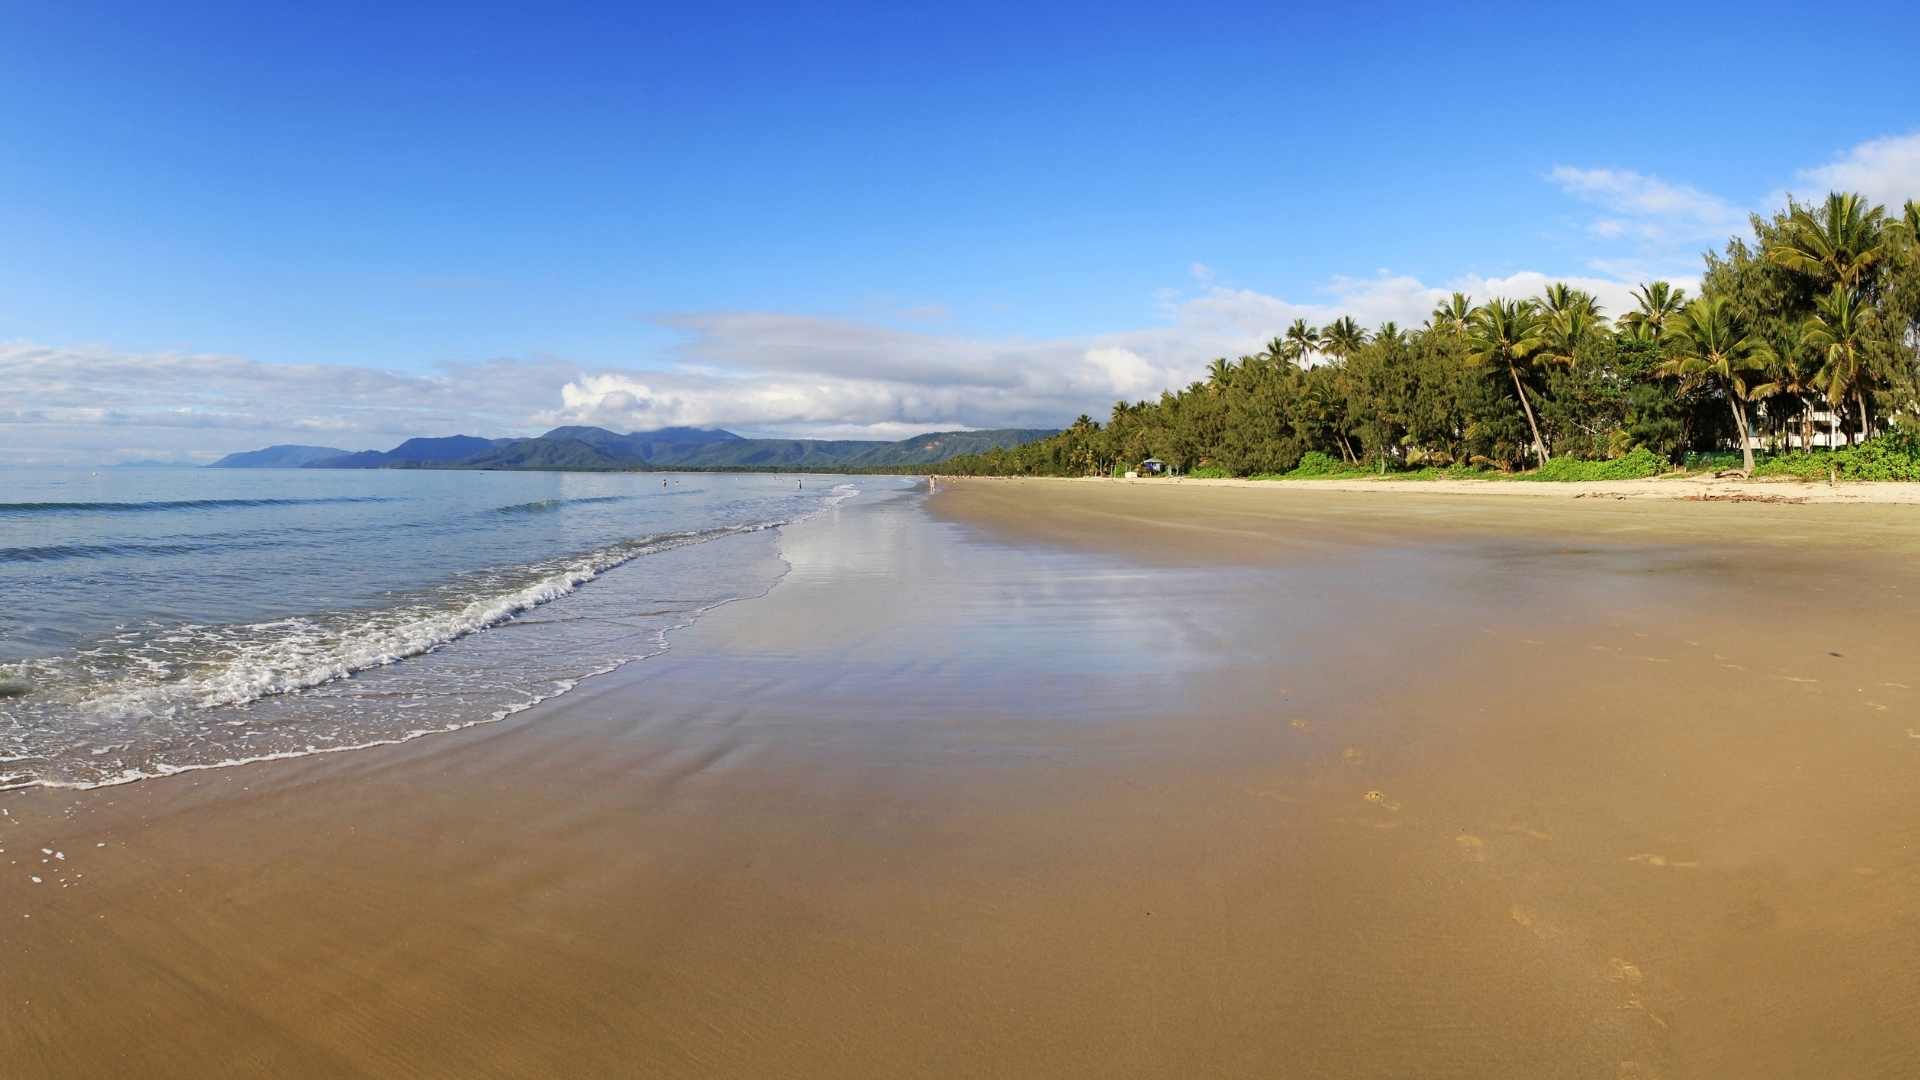 Things to do between Cairns and Port Douglas Drive from Cairns to Port Douglas Cairns to Palm Cove, Palm Cove to Port Douglas Cairns to Port Douglas drive Palm Cove Kuranda Hartley’s Stop off at beaches Mossman Gorge Mareebah